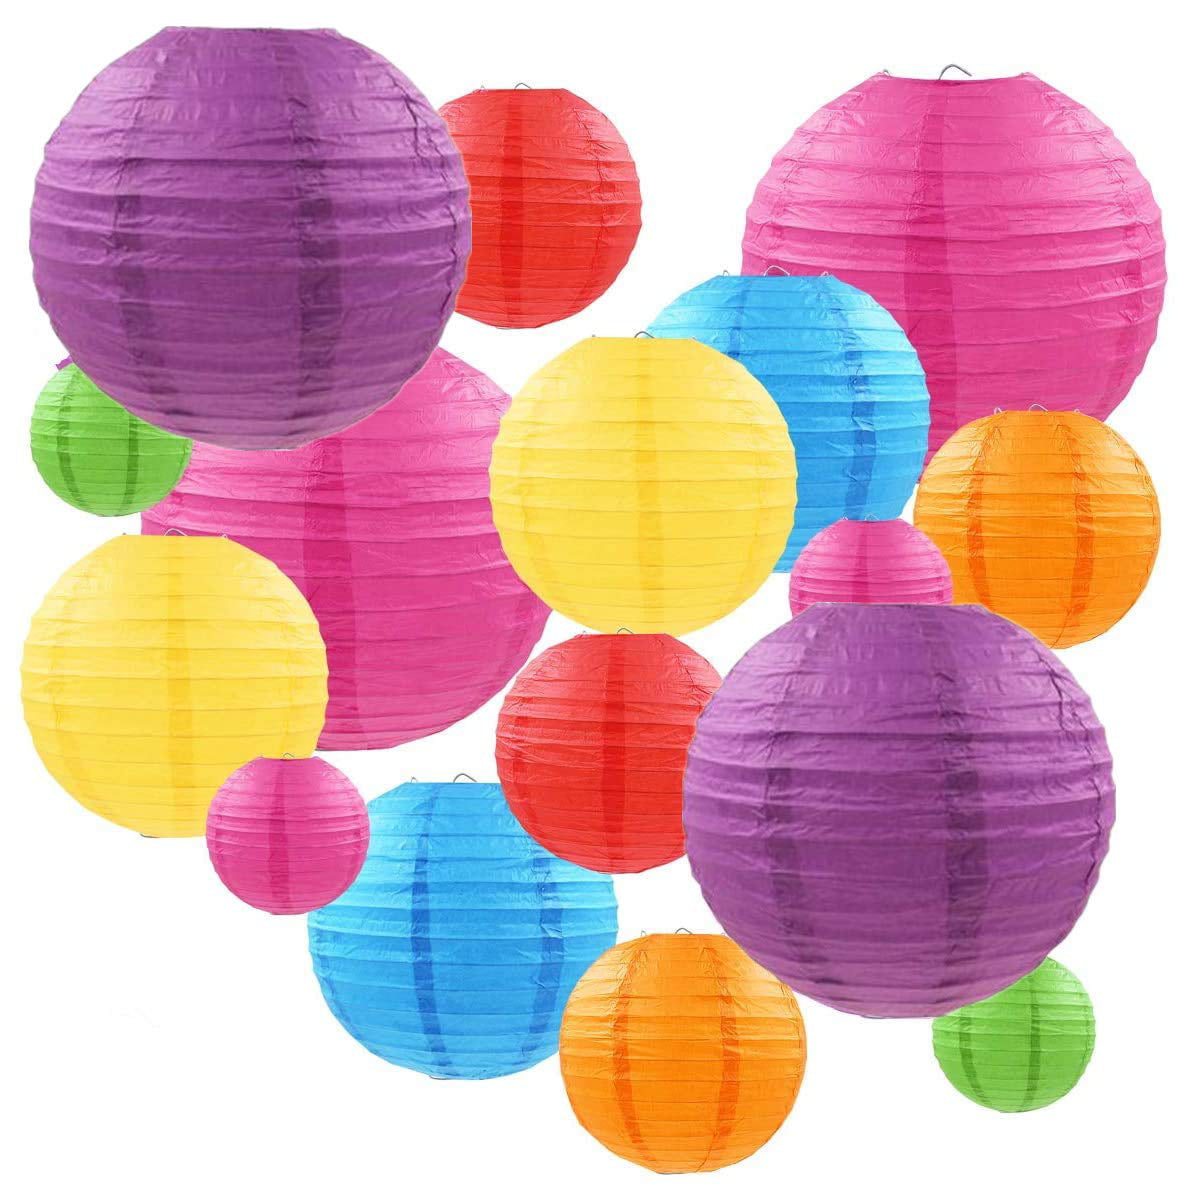 8 PURPLE Assorted Sizes Hanging Paper Lanterns Party Wedding Events Decorations